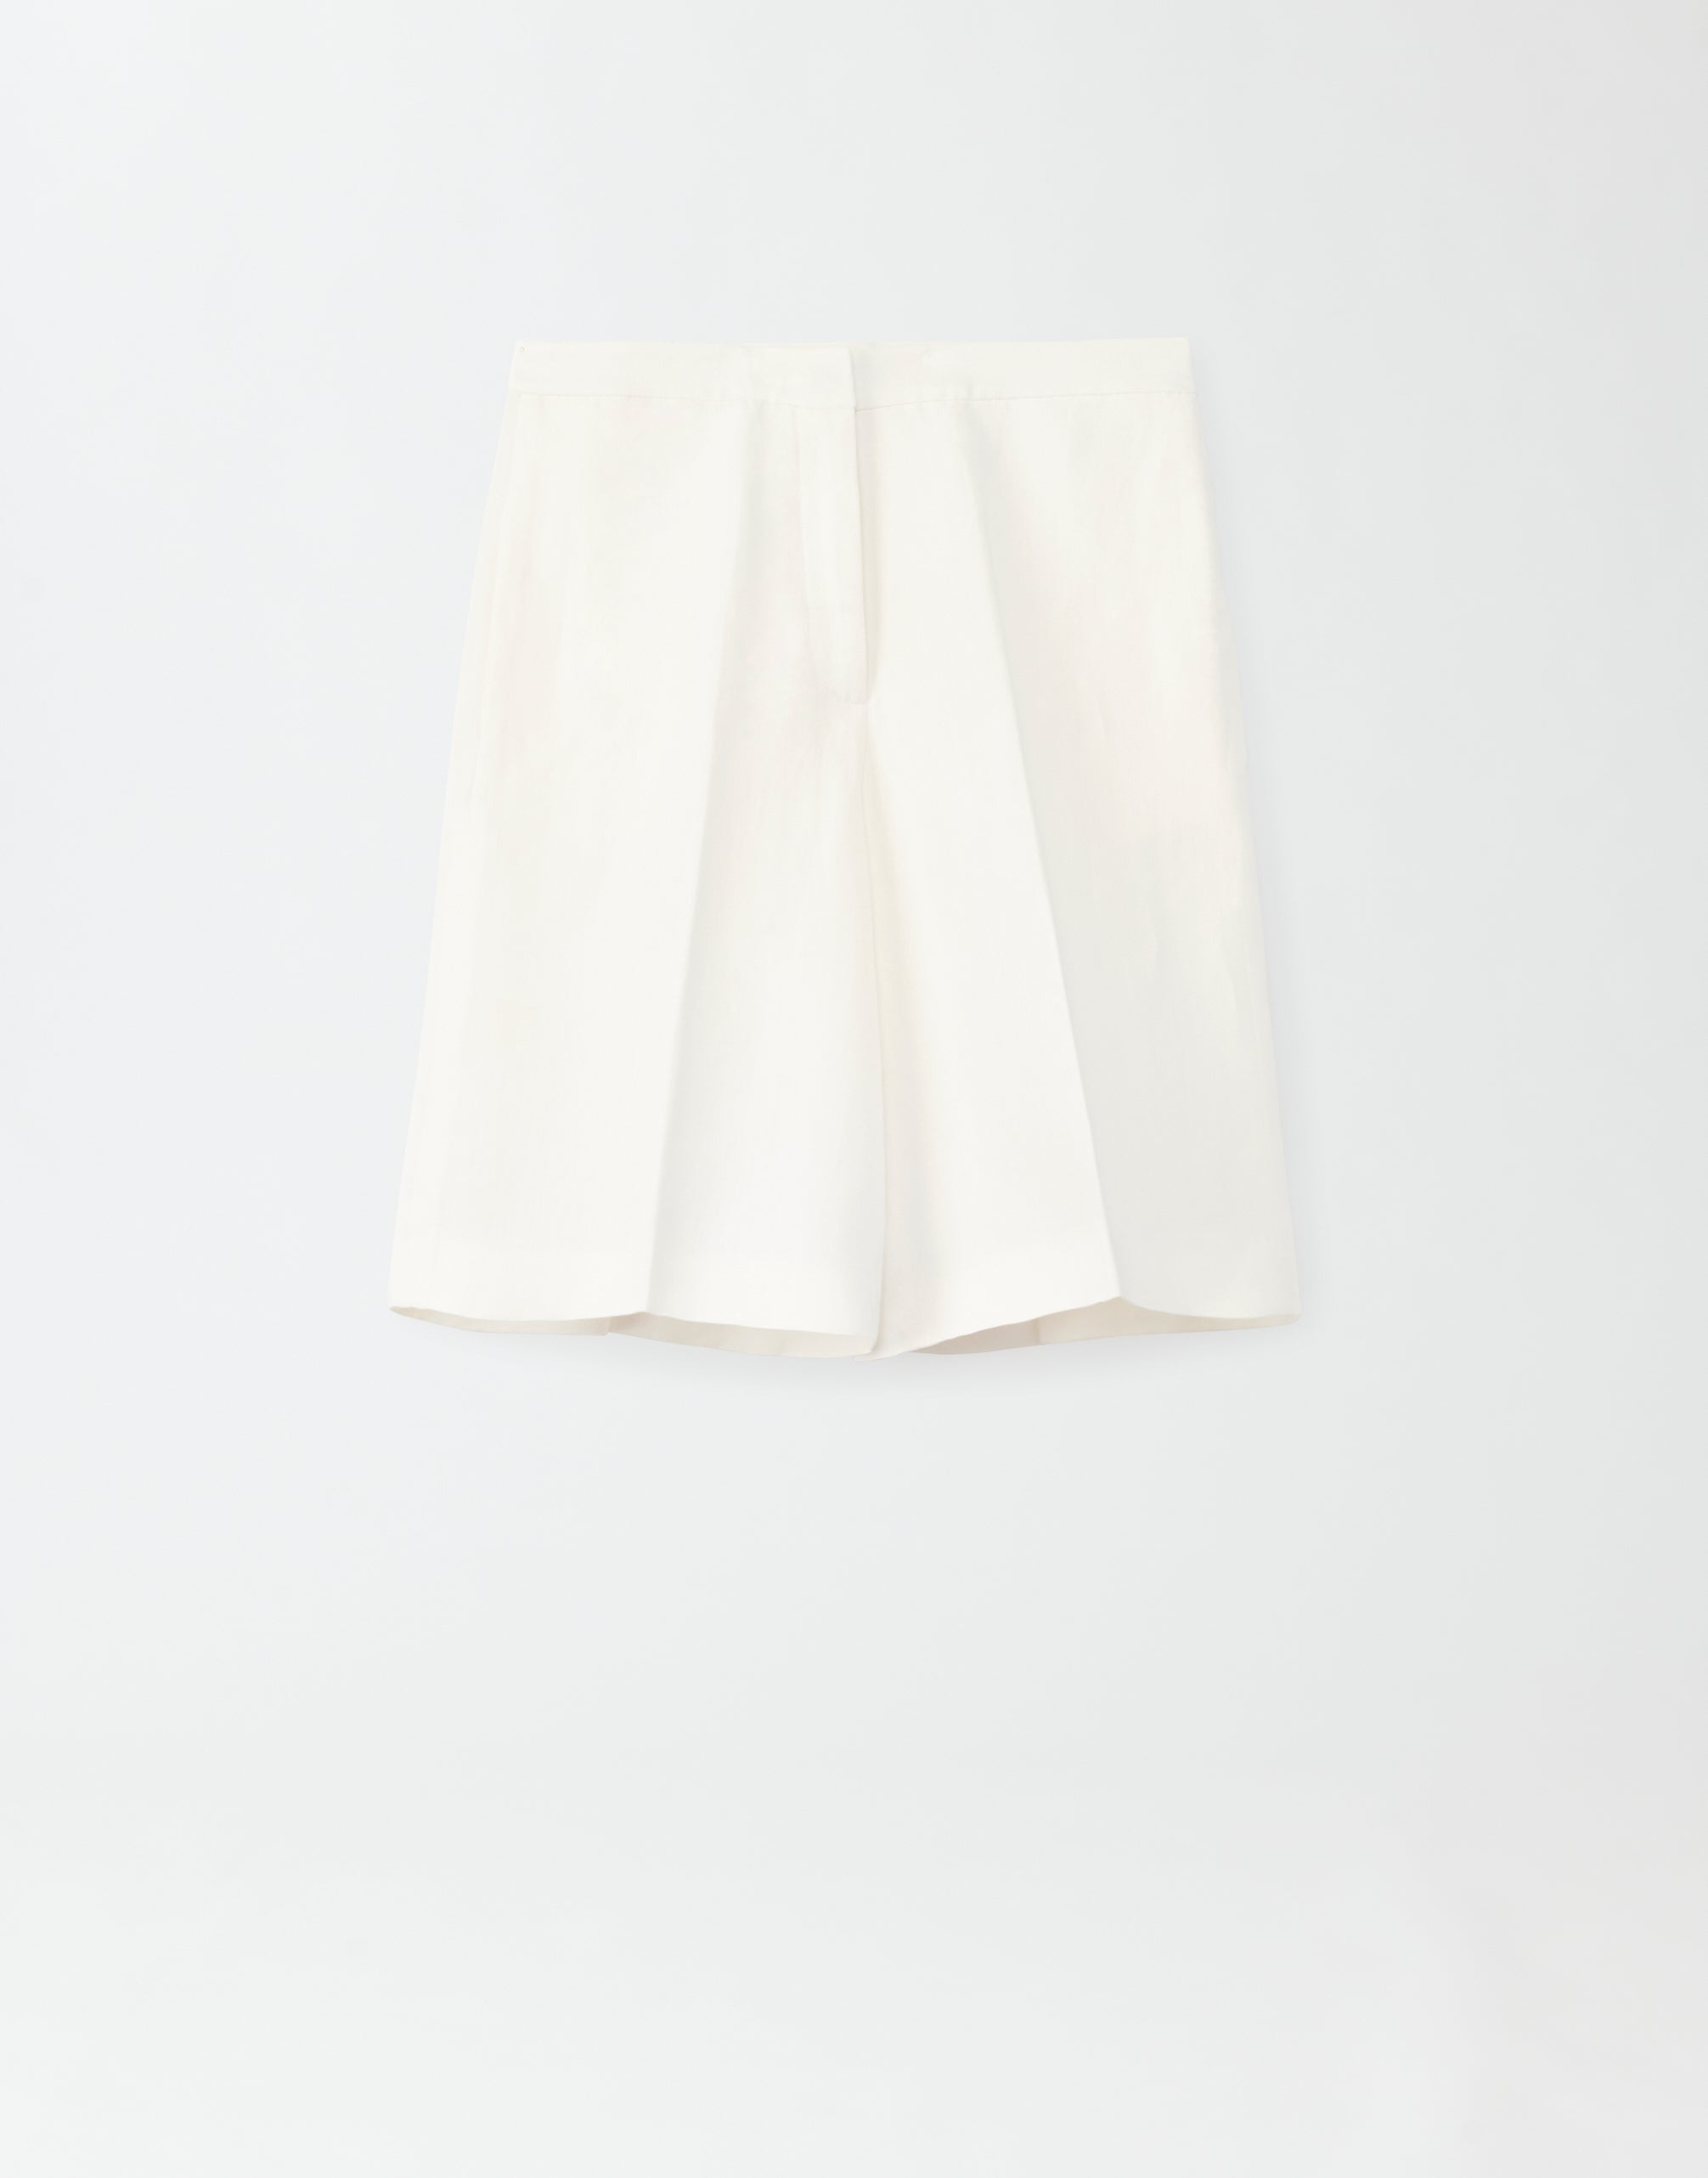 Bermuda shorts in fluid linen and viscose, white